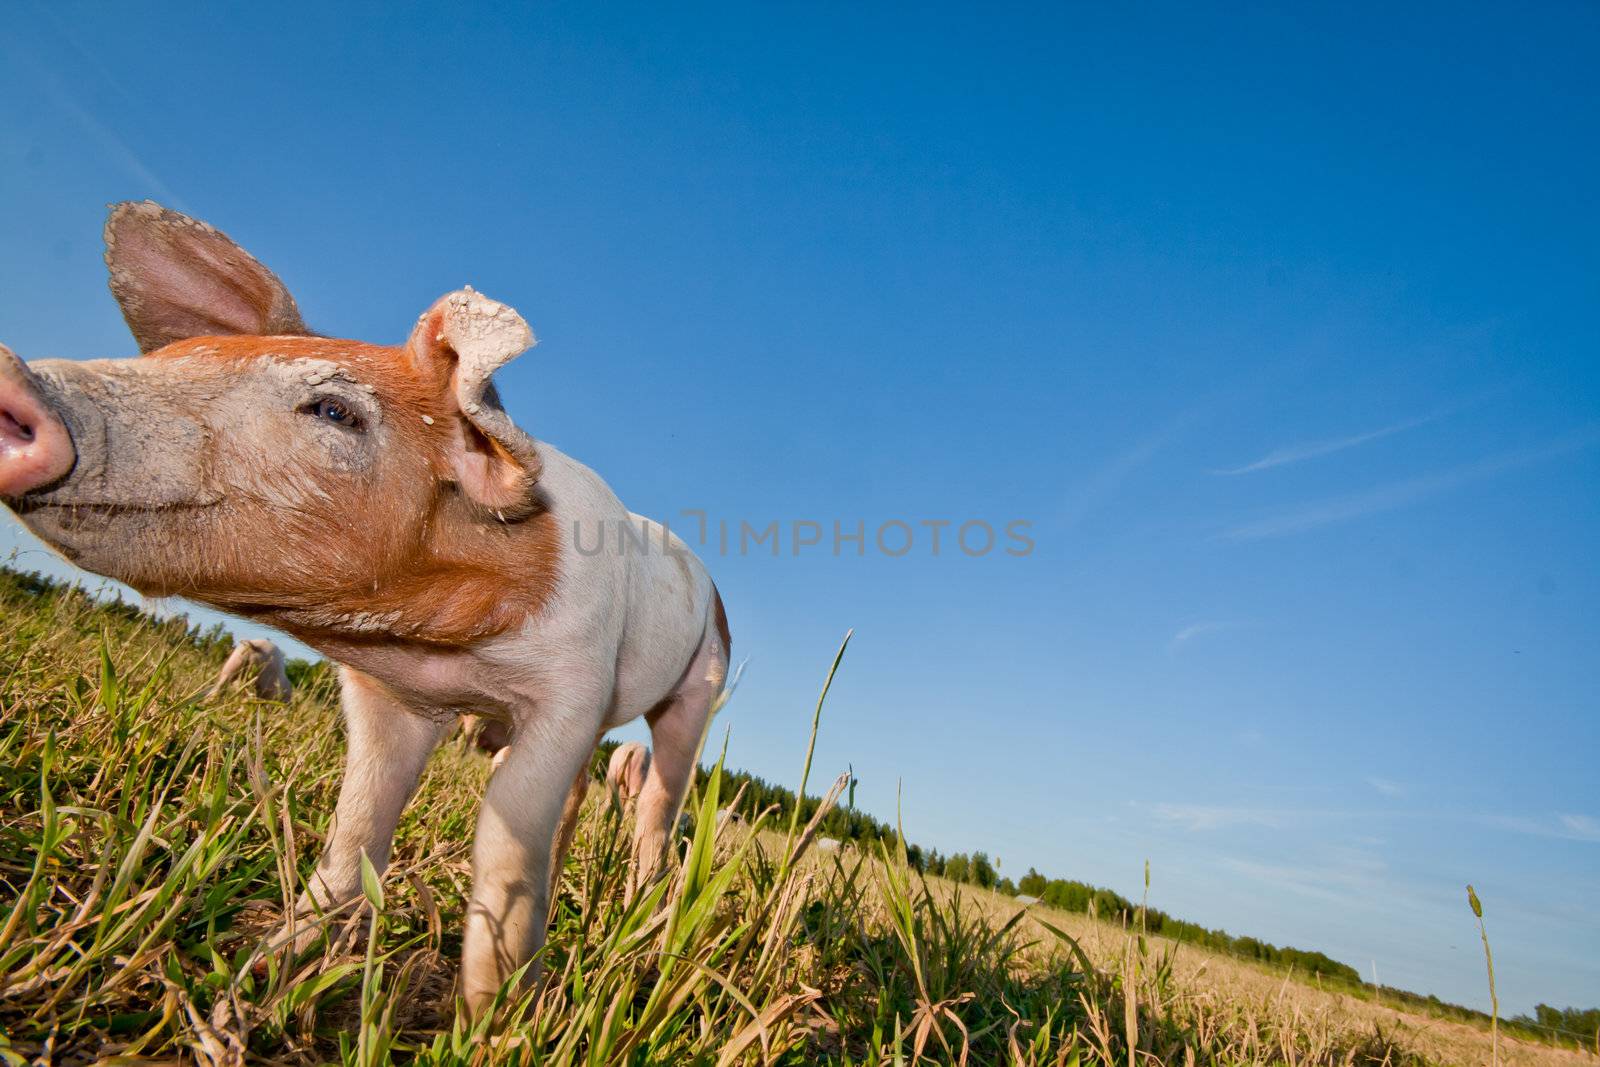 One small pig lonely on a field